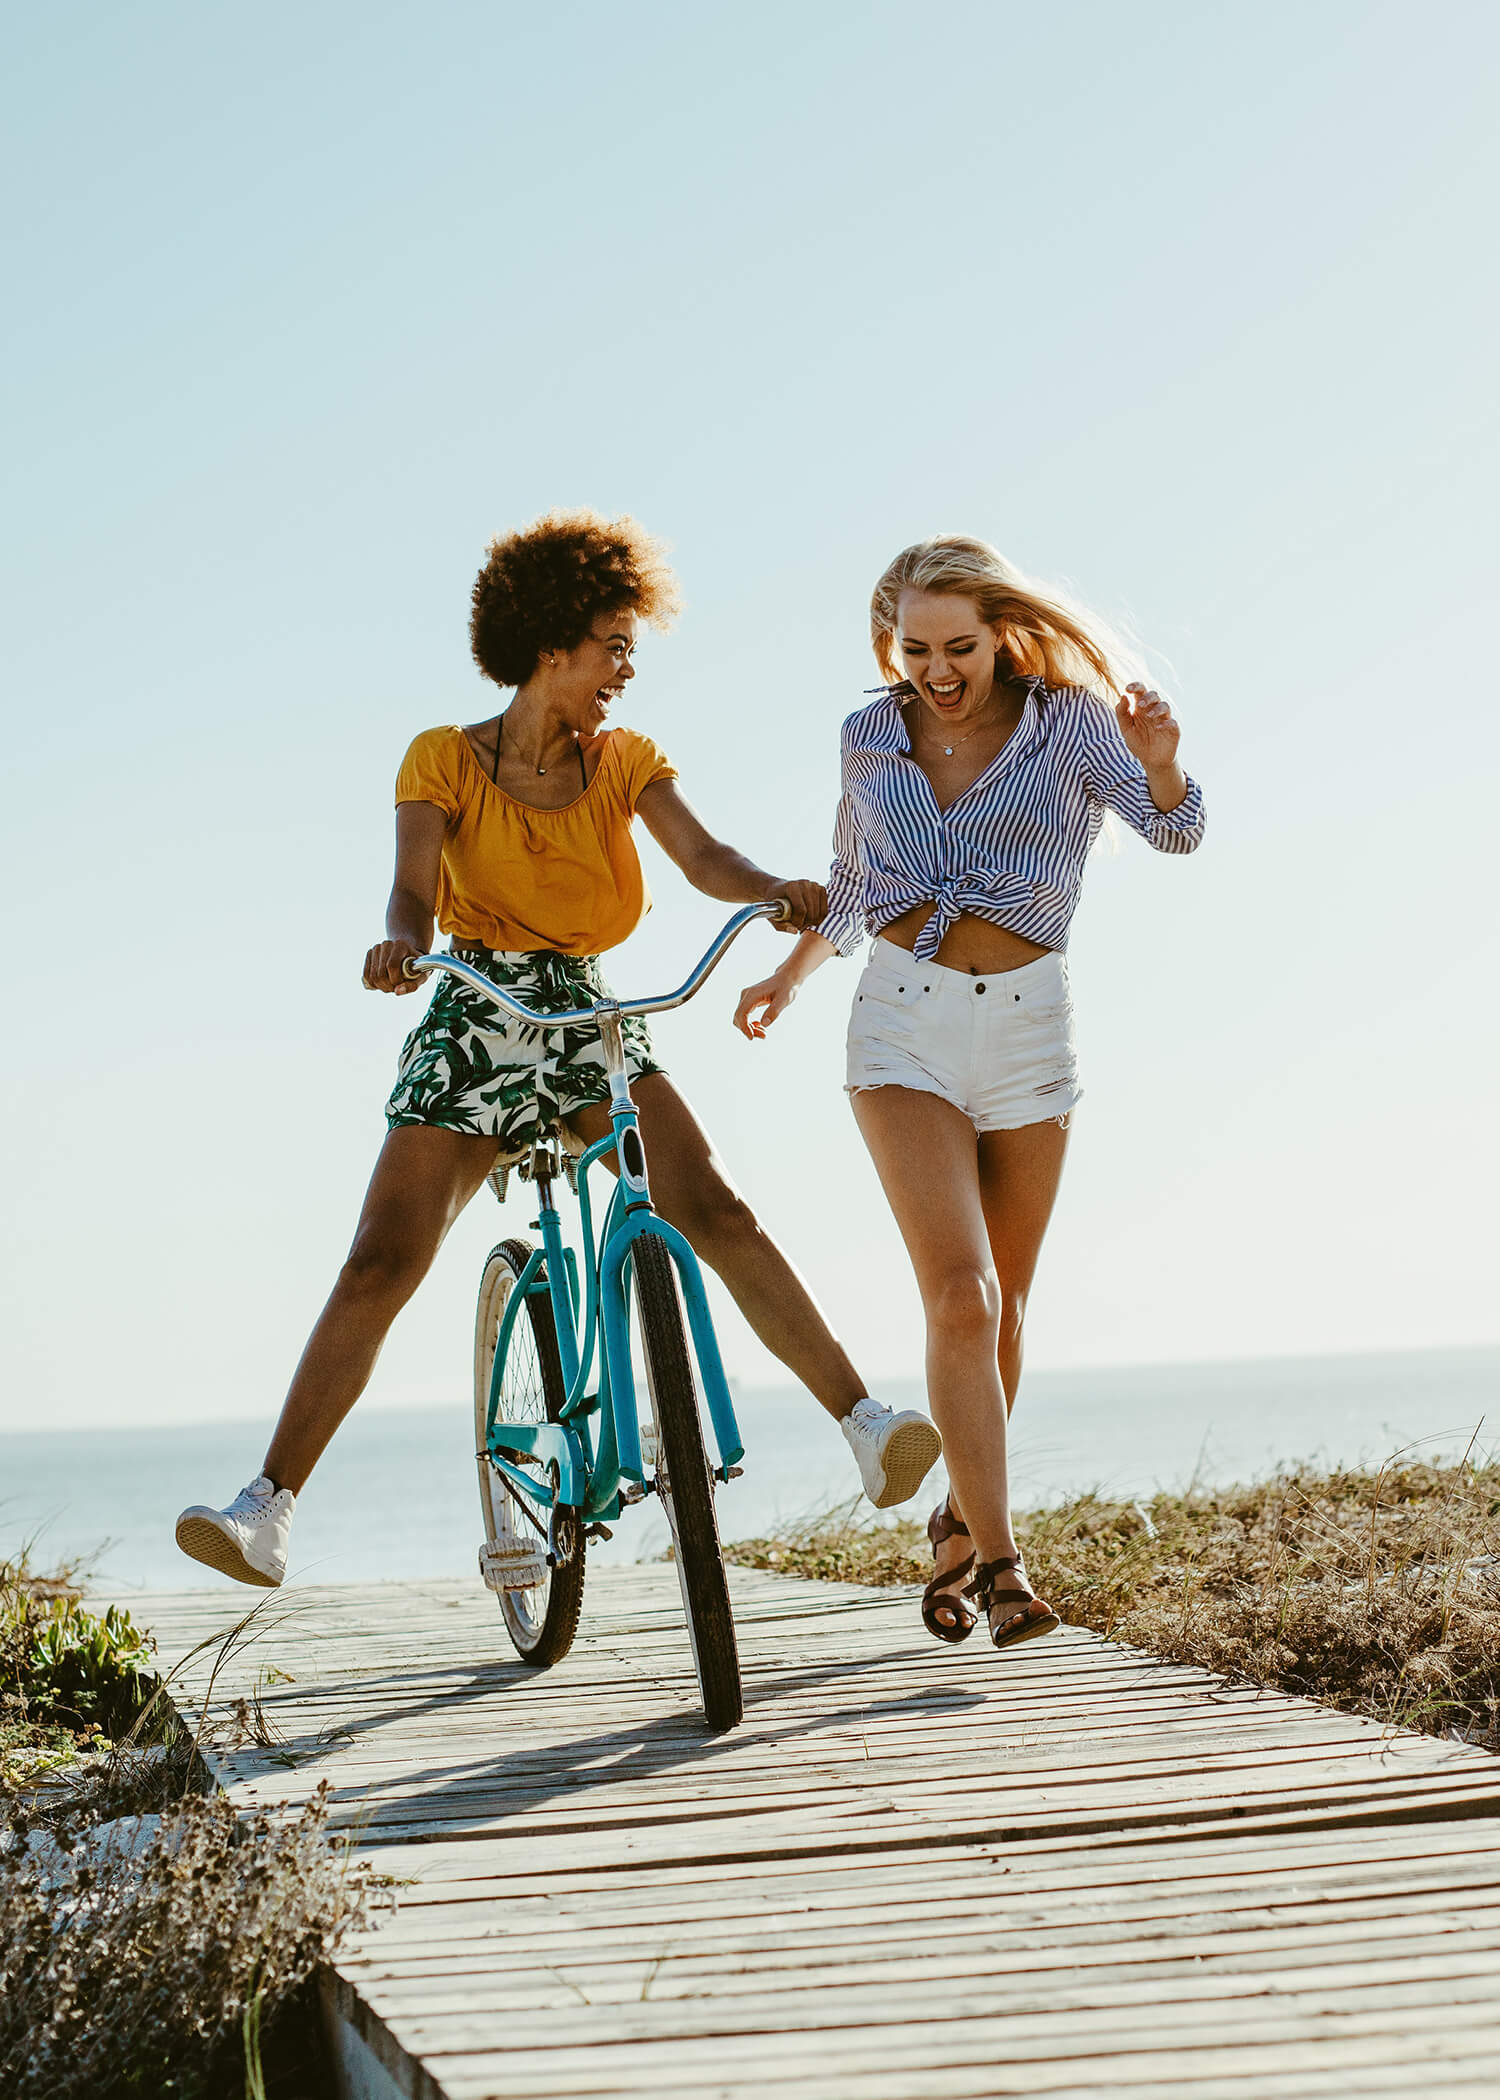 An image of two young women on a boardwalk smiling while one rides a bike. This image illustrates the full lives that people live after working with a DBT therapist in Torrance, CA through a DBT program. | 90274 | 90275